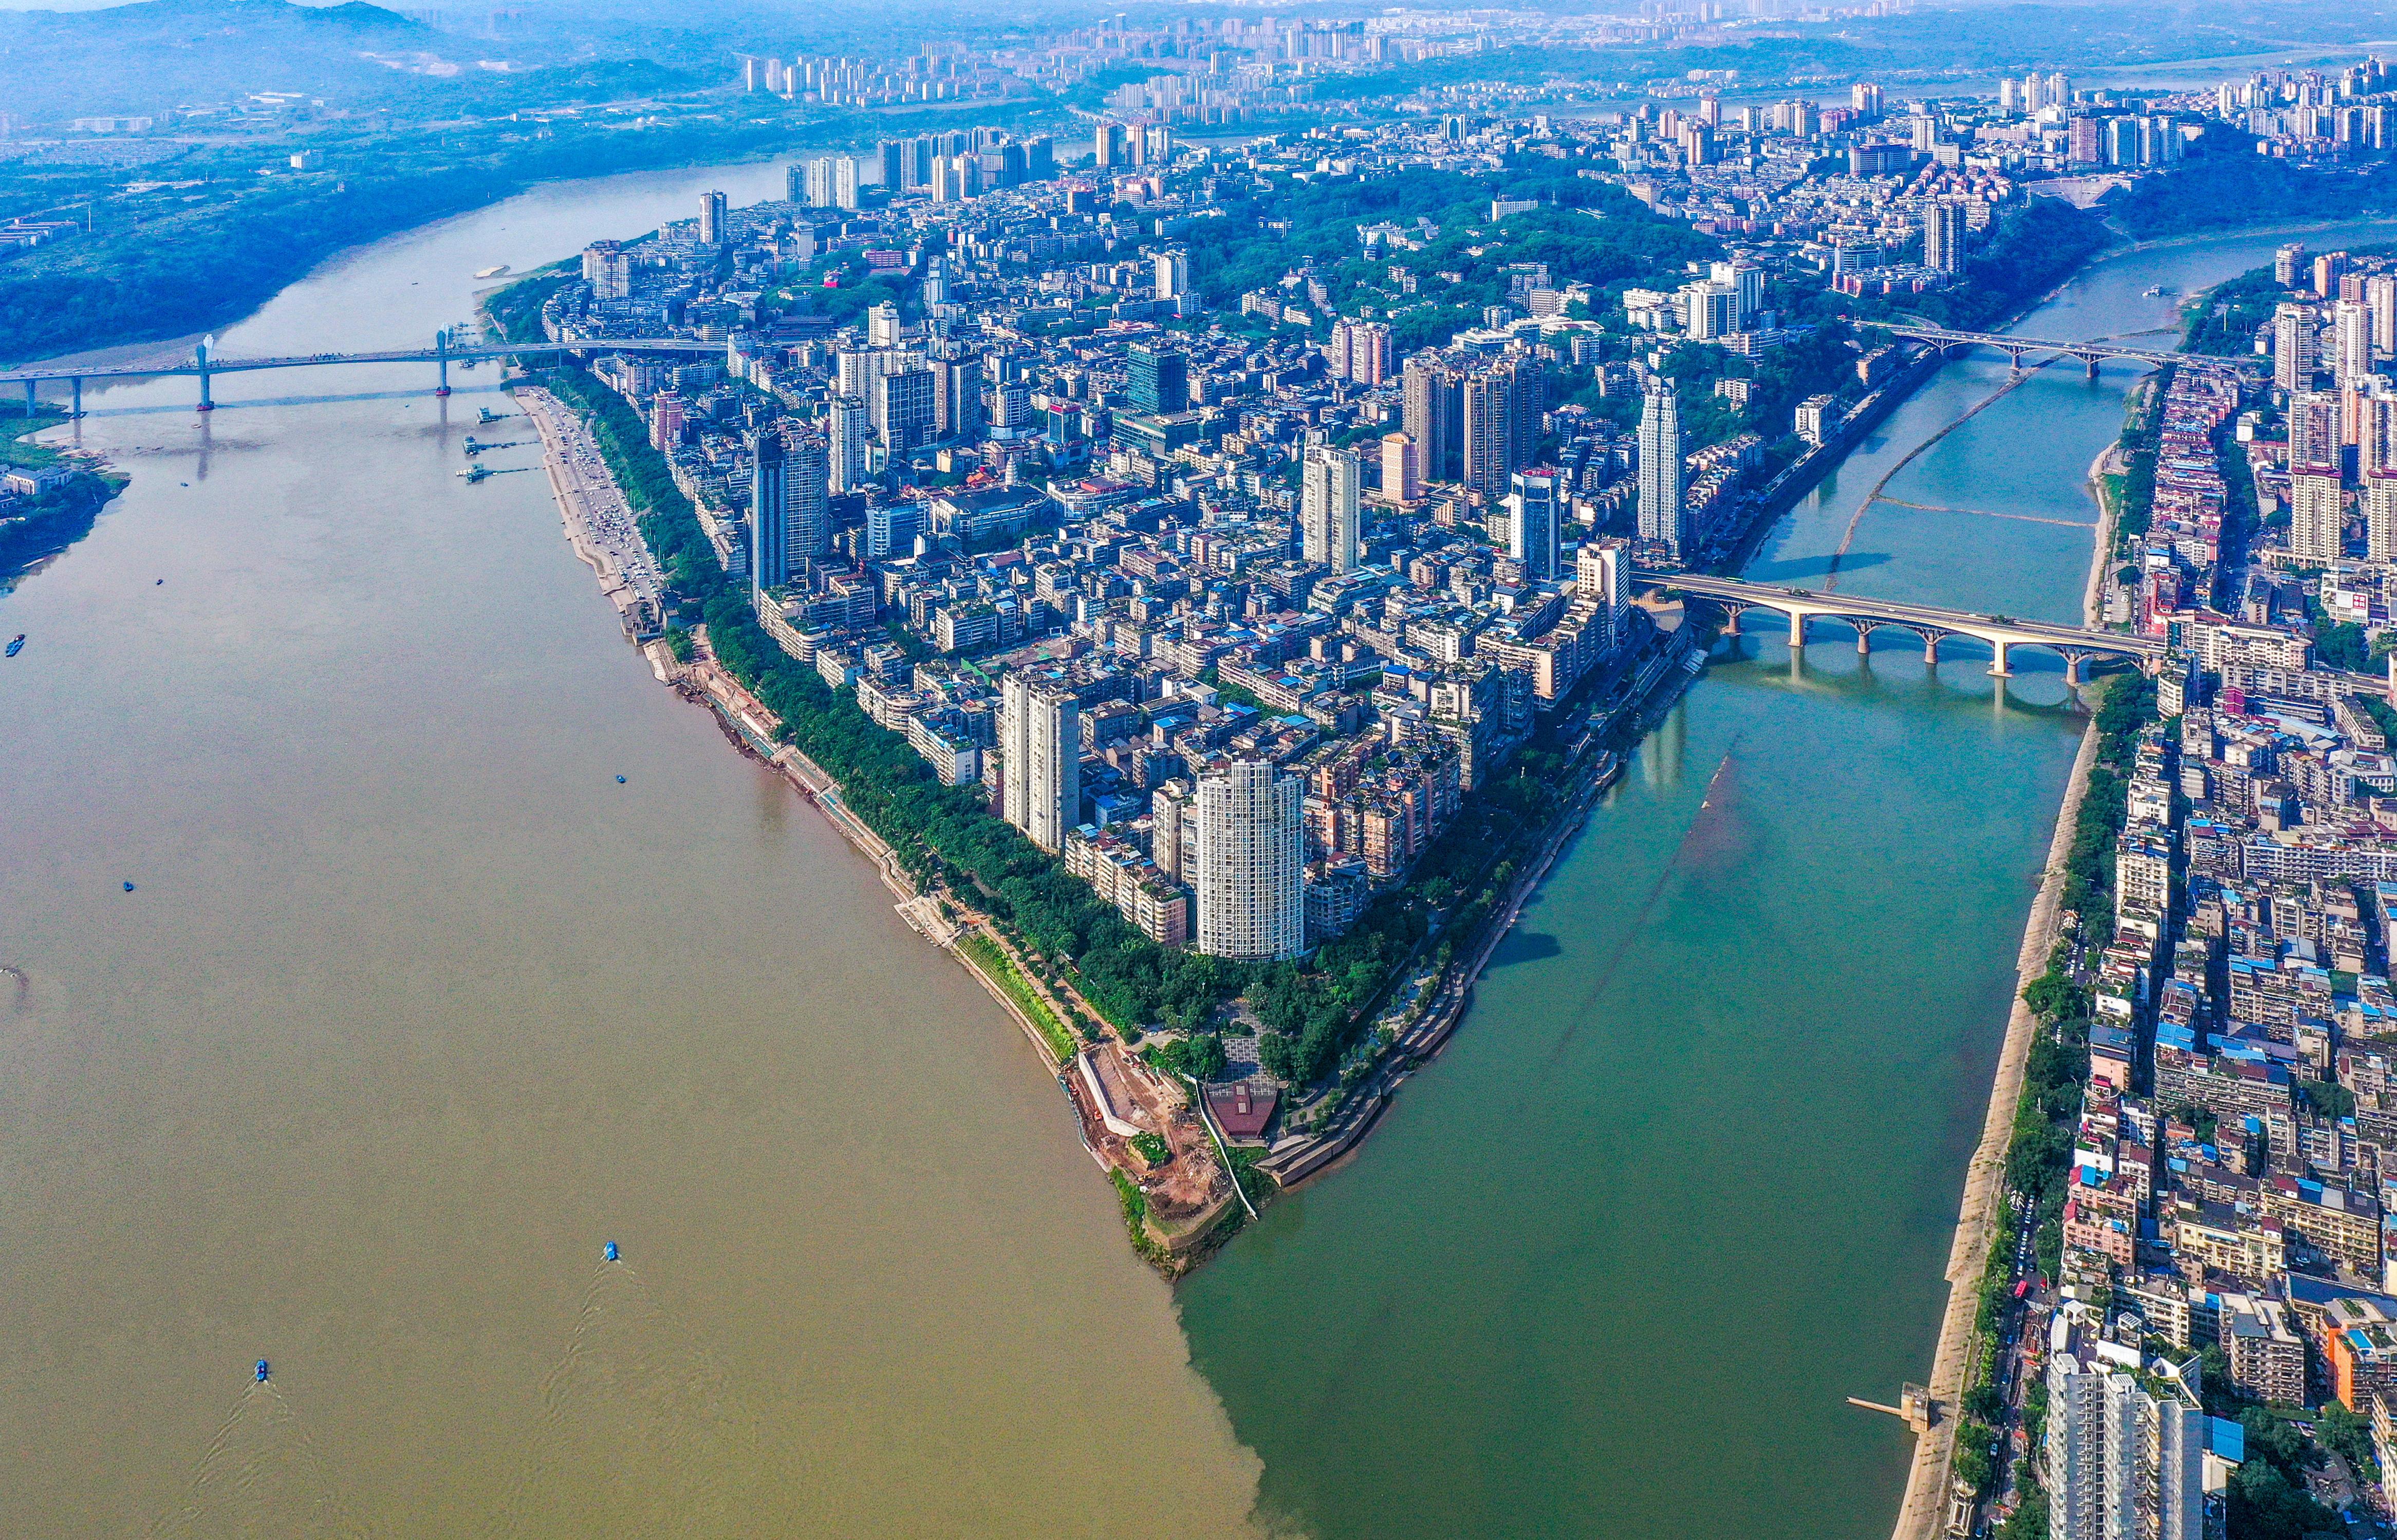 Photo taken on June 6, 2023, shows the phenomenon at the confluence of the Yangtze River and the Tuojiang River. The color differences are mainly due to their difference in debris and vegetation, causing a contrasting scene when the two bodies of water merge into one another to become a single river. /CNSPHOTO